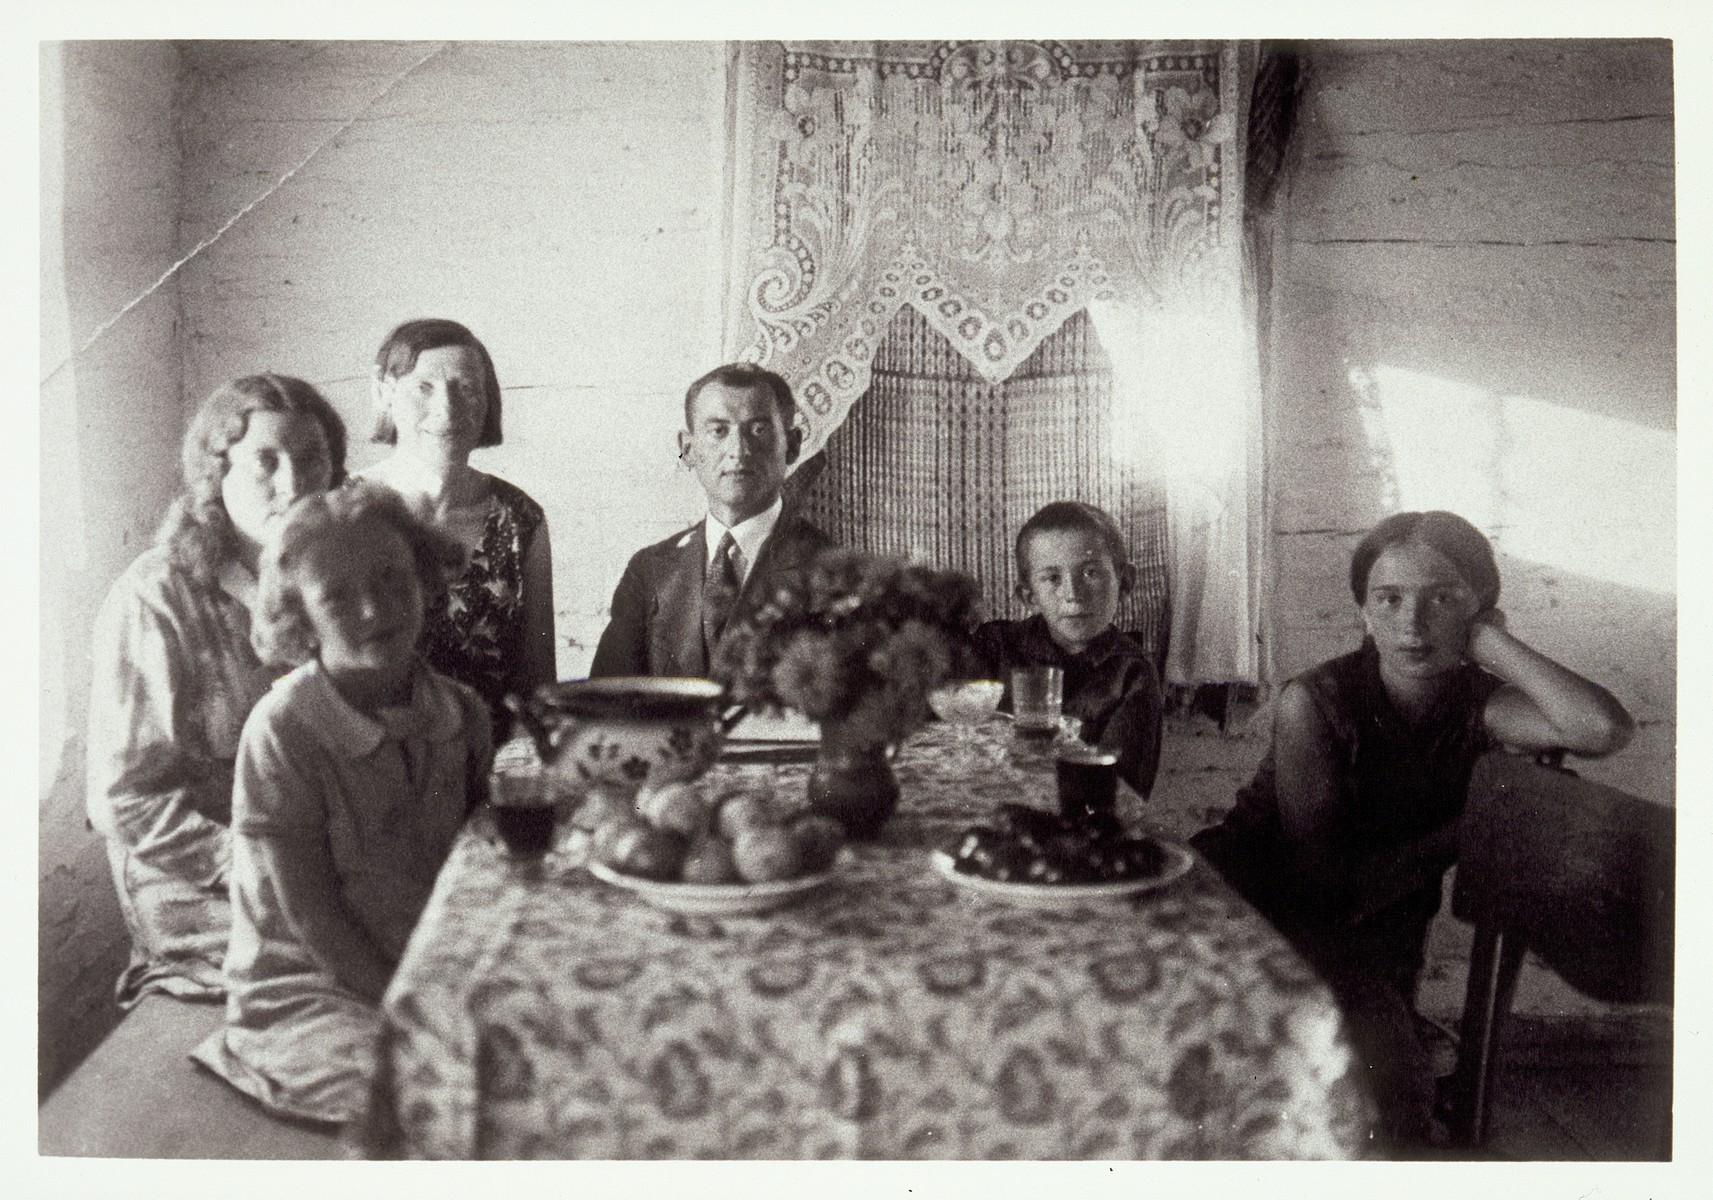 Dr. Zytoner, an assimilated Jewish veterinarian from Warsaw, sits in the center of a group of women and children around the Moszczenik dining room table. 

Dr. Zytoner boarded at the Moszczenik home while working in Eisiskes.  Pictured from right to left are Atara Kudlanski, her brother Bill, Dr. Zytoner, Atara and Bill's mother Hanneh-Beile  (nee Moszczenik), her sister Liebke, and her daughter Zltaka.  

Hanneh-Beile and her three children immigrated to America.  Liebke was killed by the Polish Home Army.